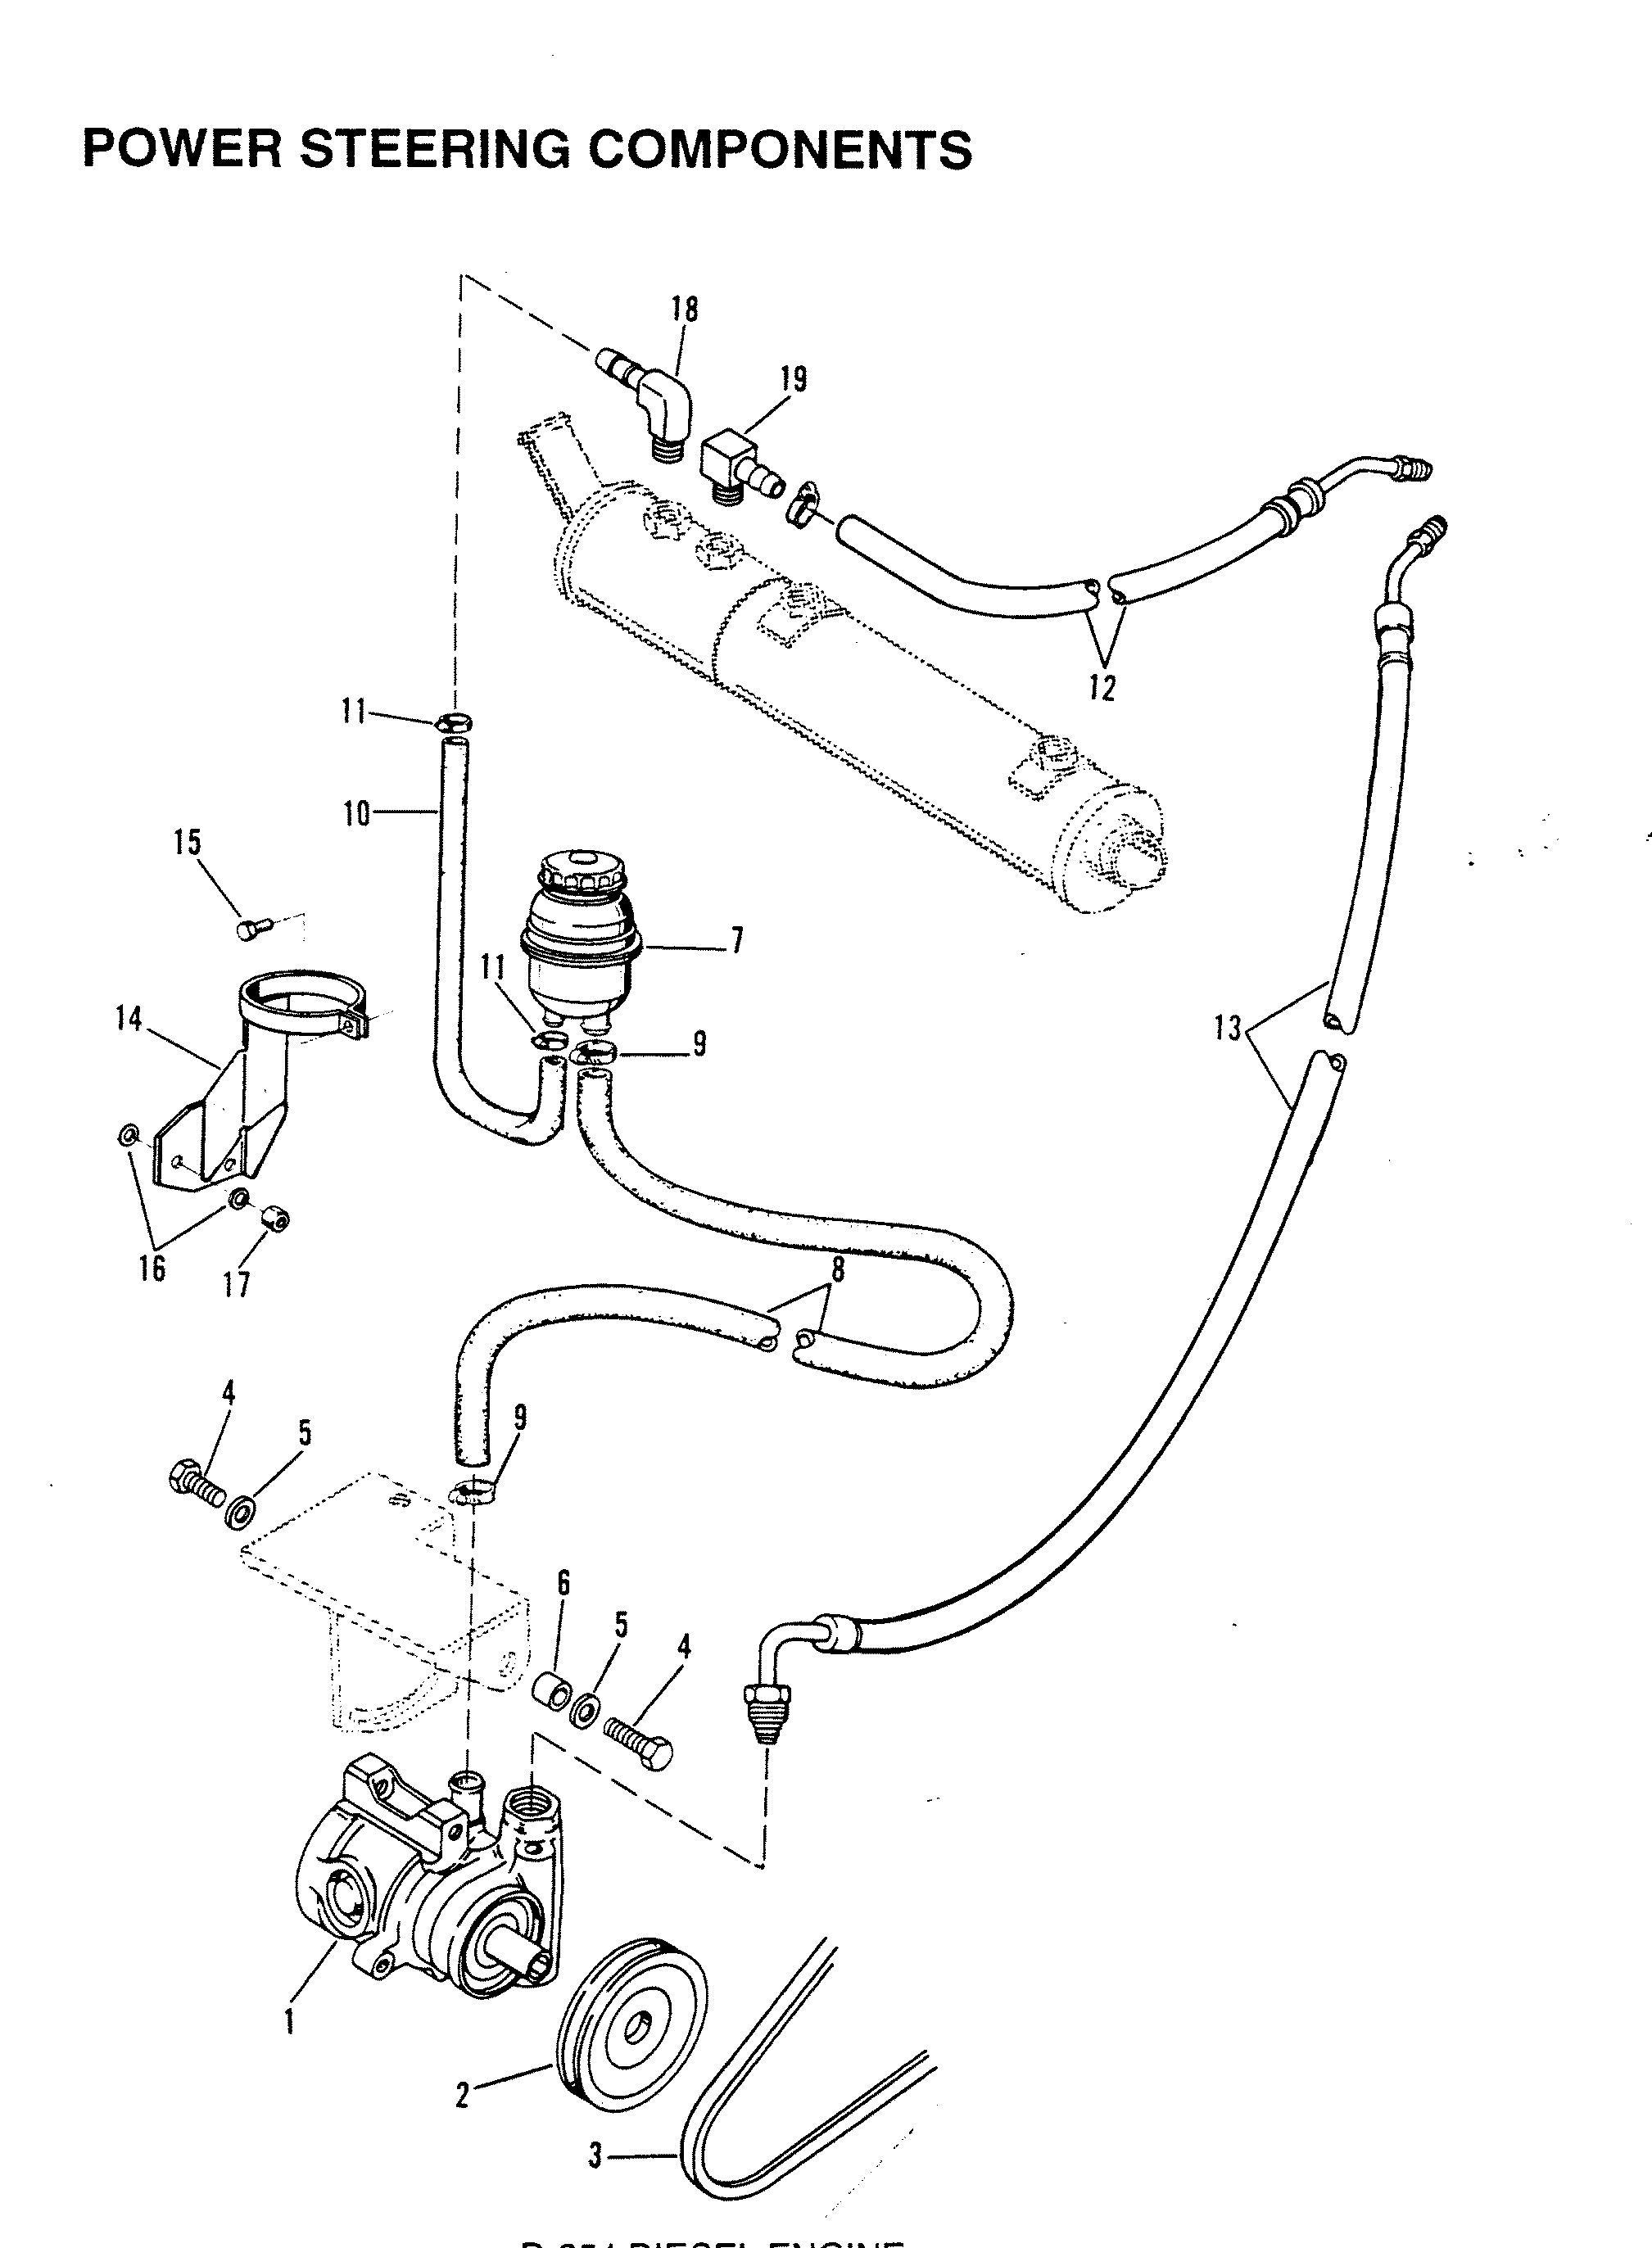 POWER STEERING COMPONENTS (STERN DRIVE)